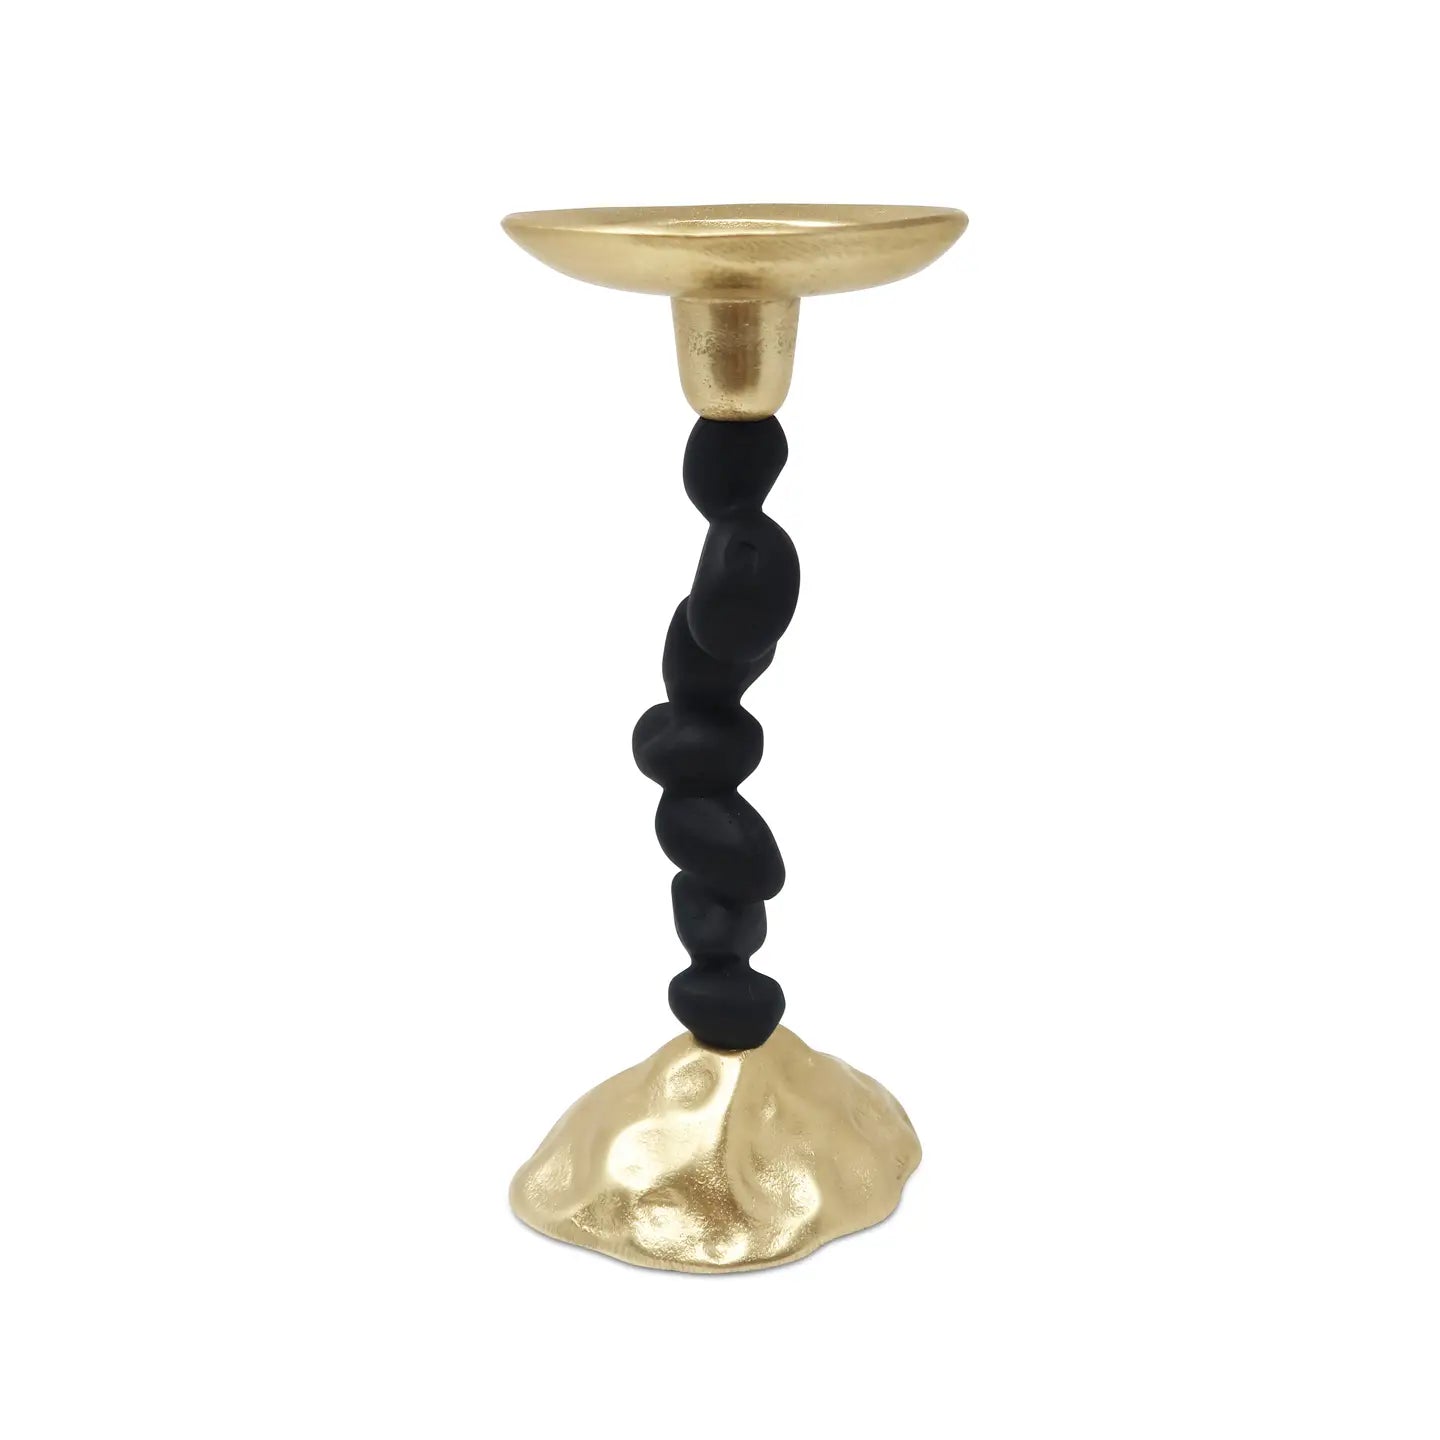 Black and Gold Pillar Candle Holder with Pebble Design - Set of 2